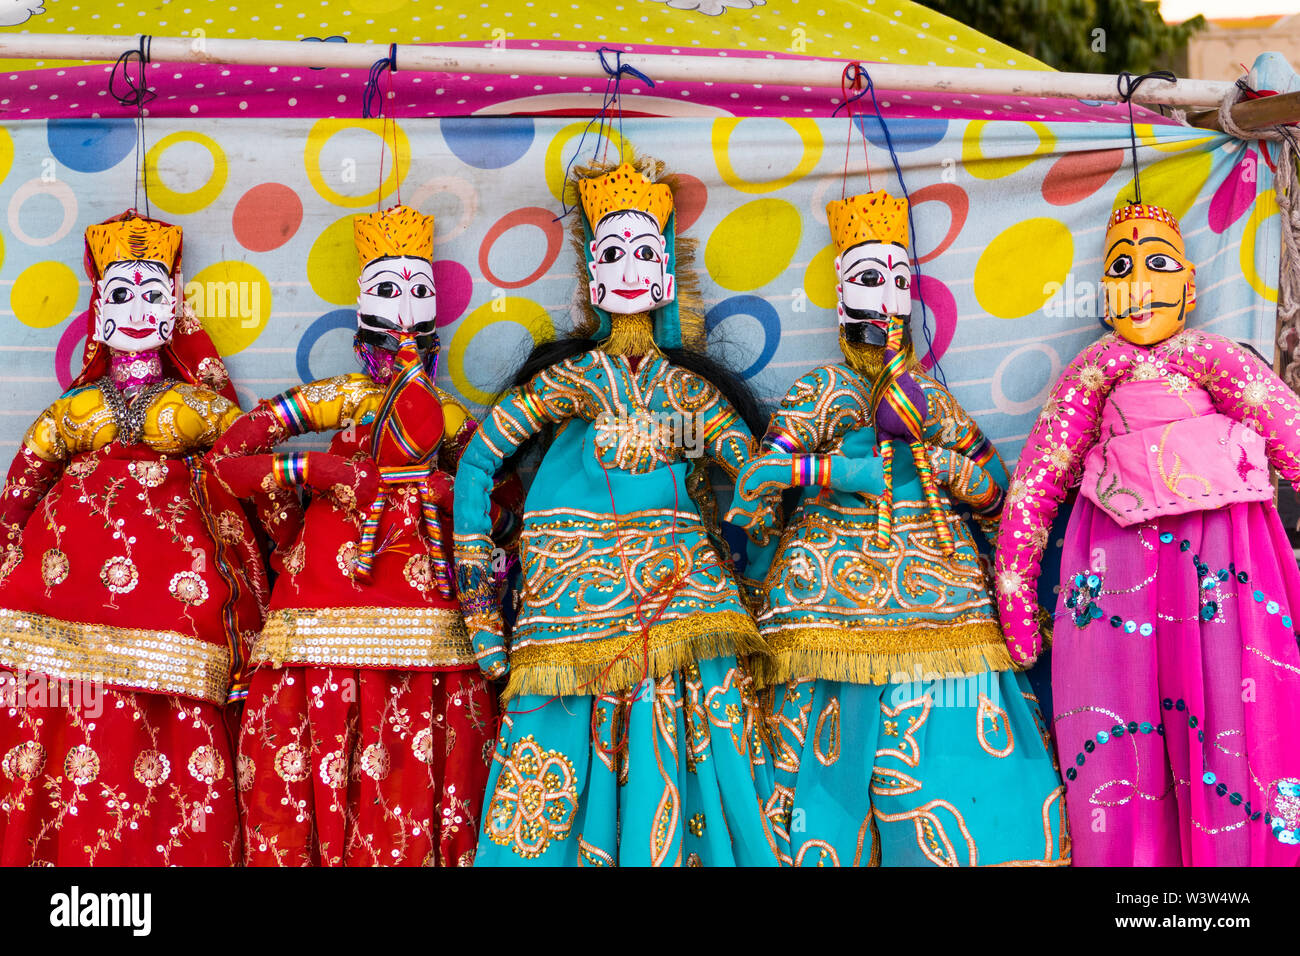 Traditional Rajasthan String Puppets for Sale on the Street in Jaipur in Rajasthan India wher Puppetry is and Ancient Tradition and Entertainment . Stock Photo